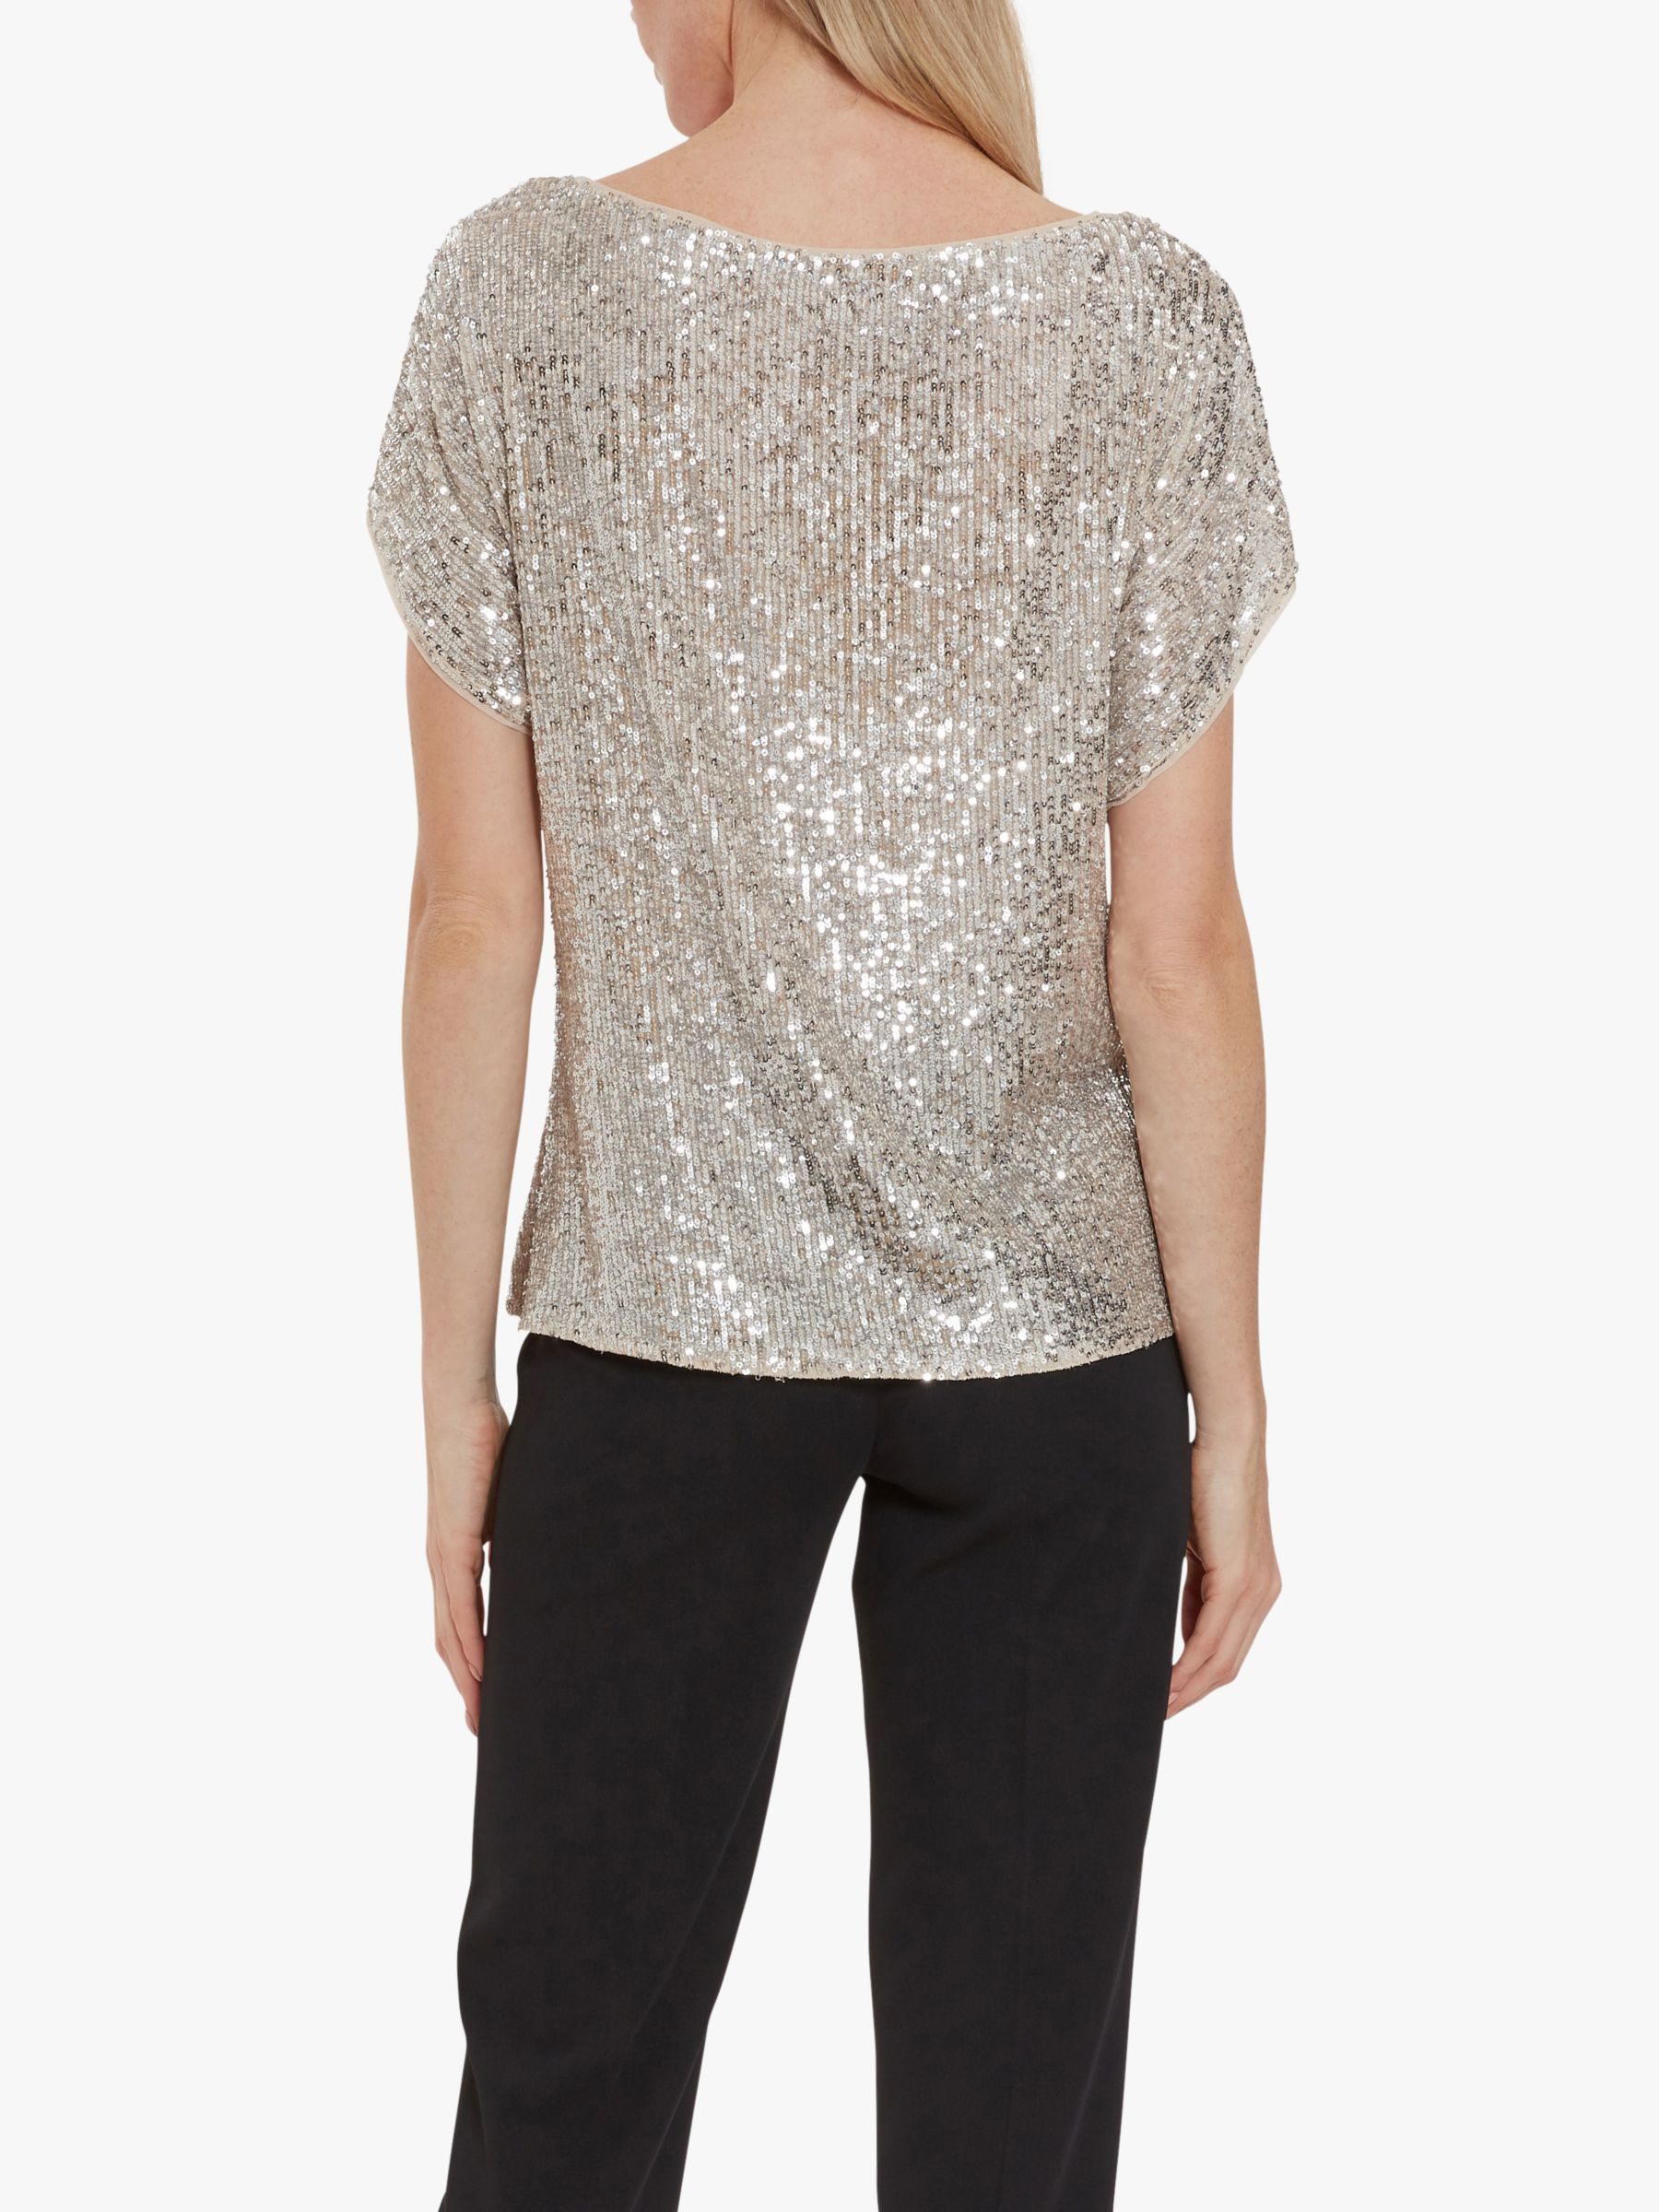 Gina Bacconi Lupe Stretch Sequin Top